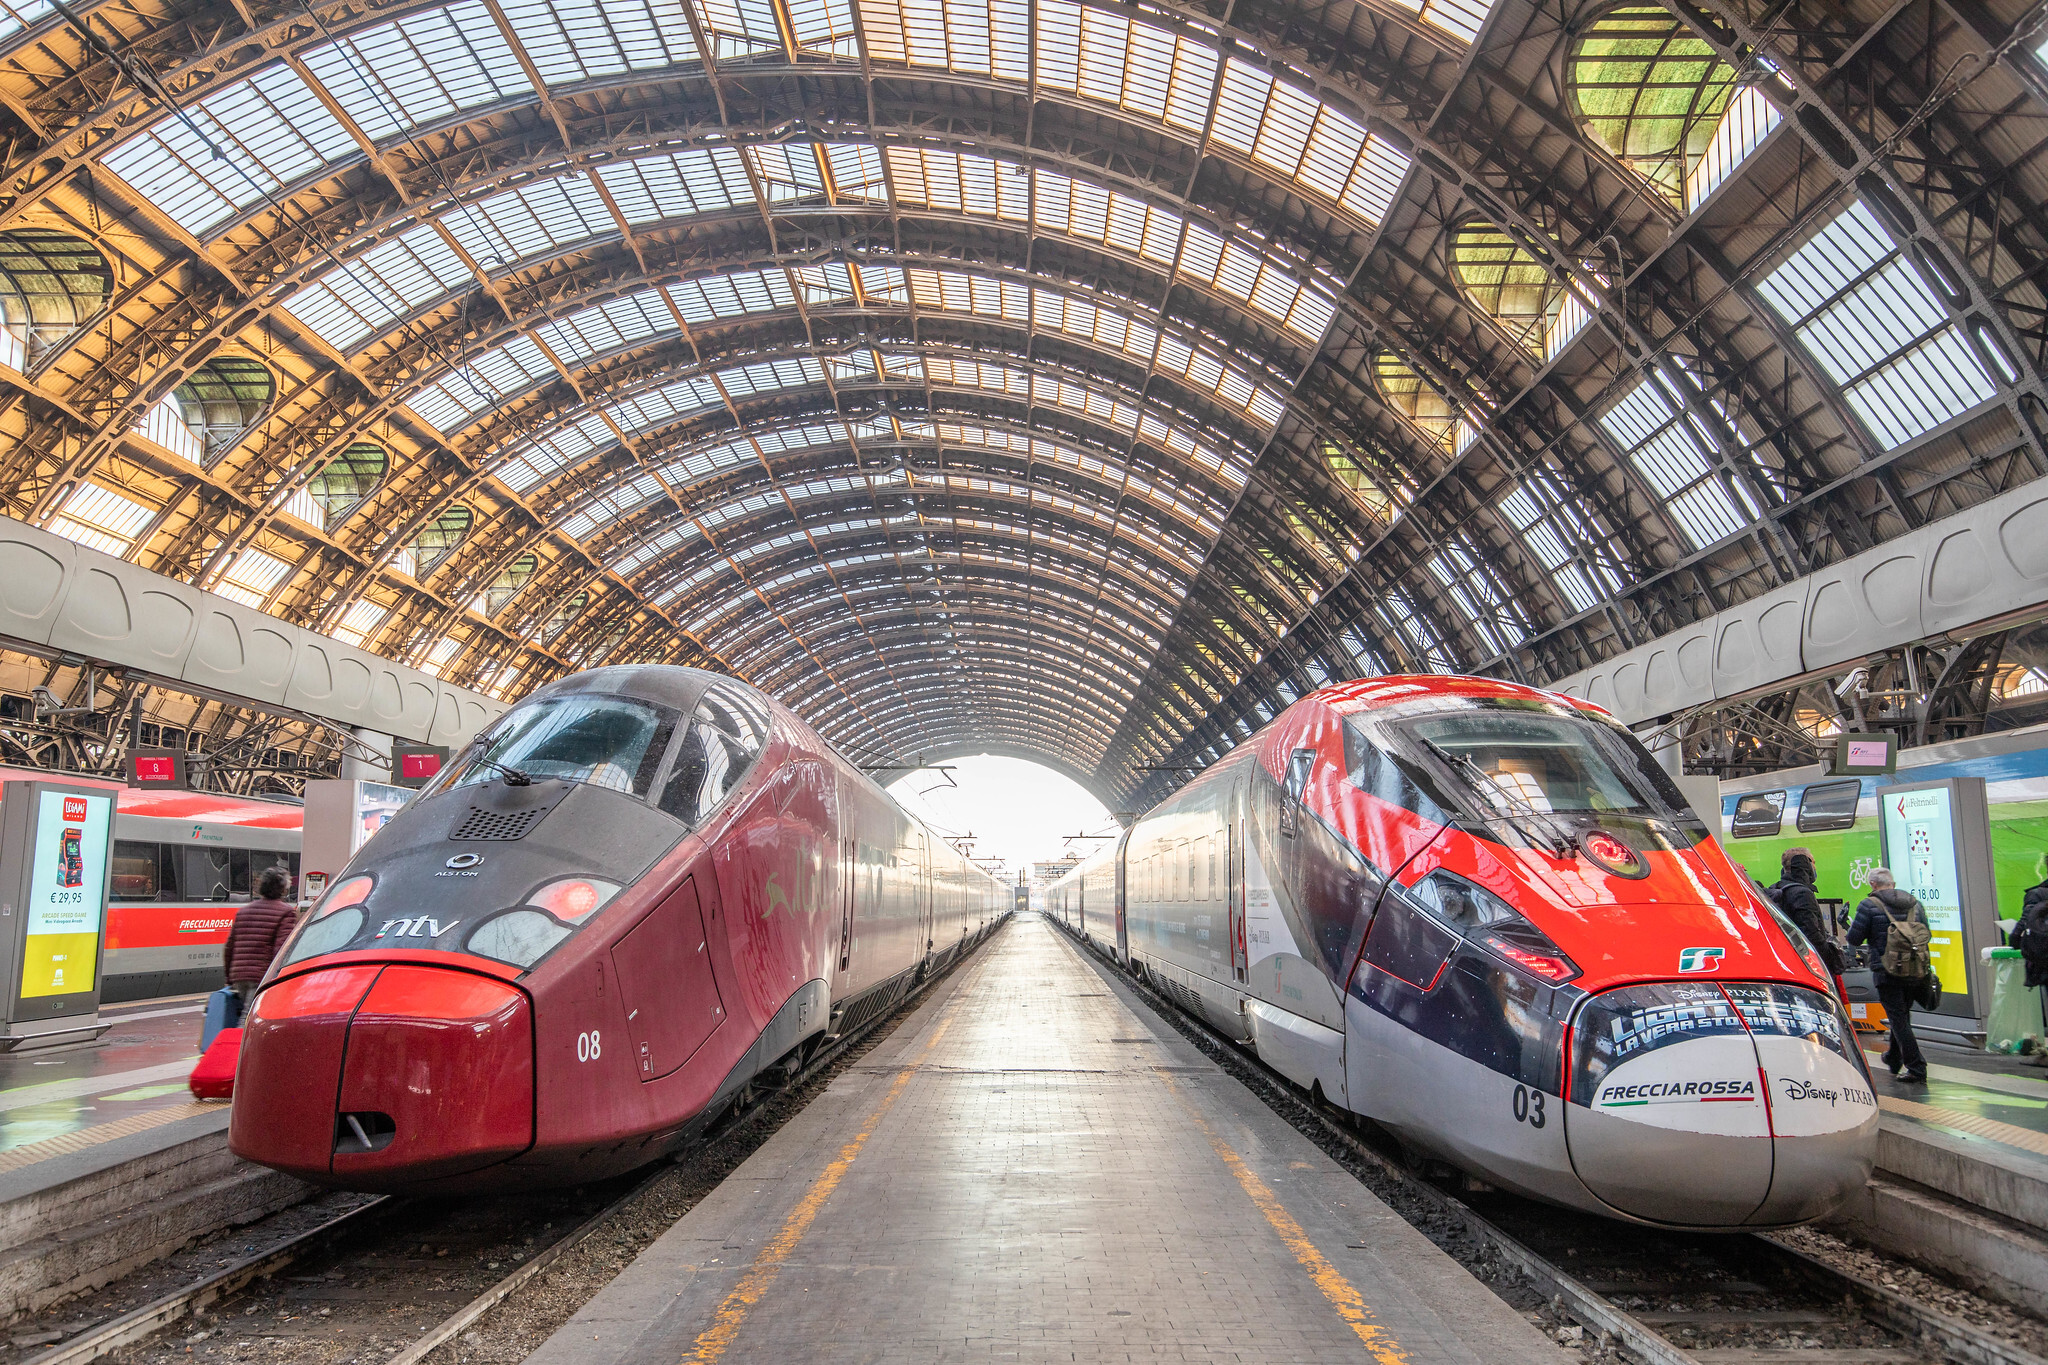 Two sleek trains inside the central station in Milan